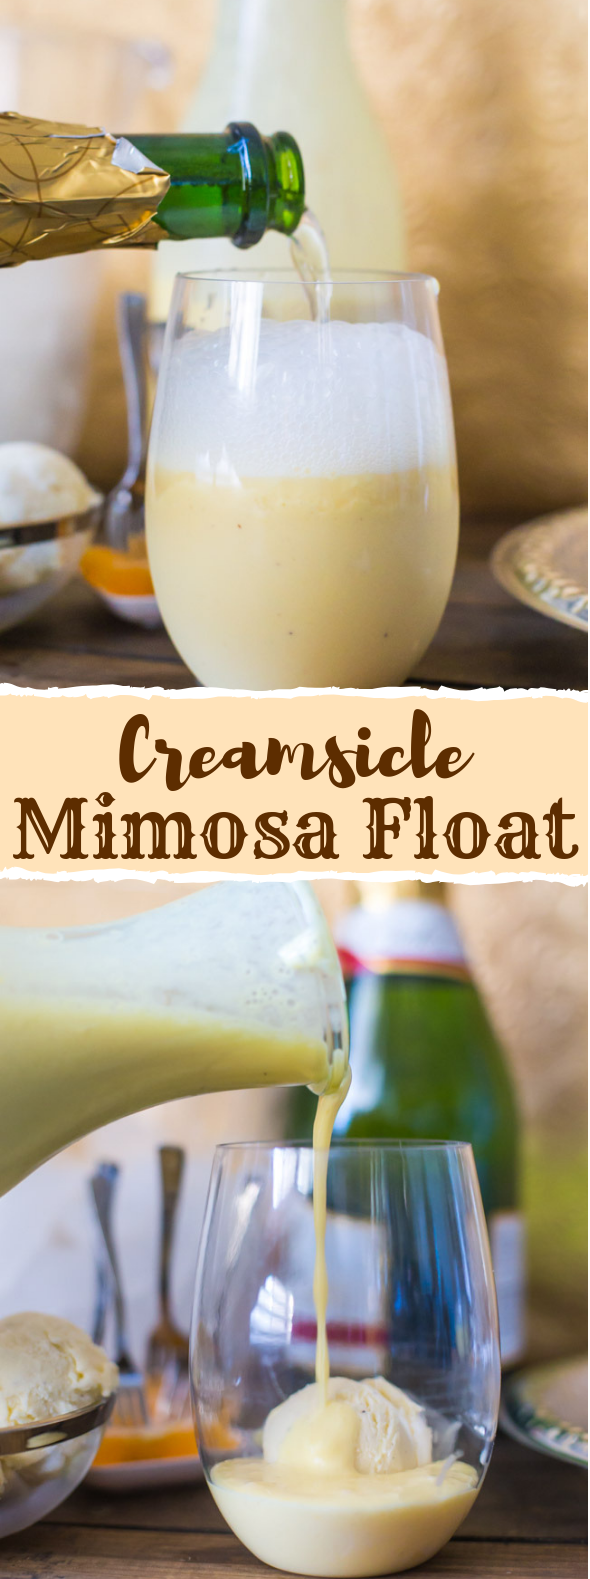 Creamsicle Mimosa Floats #drinks #cocktails